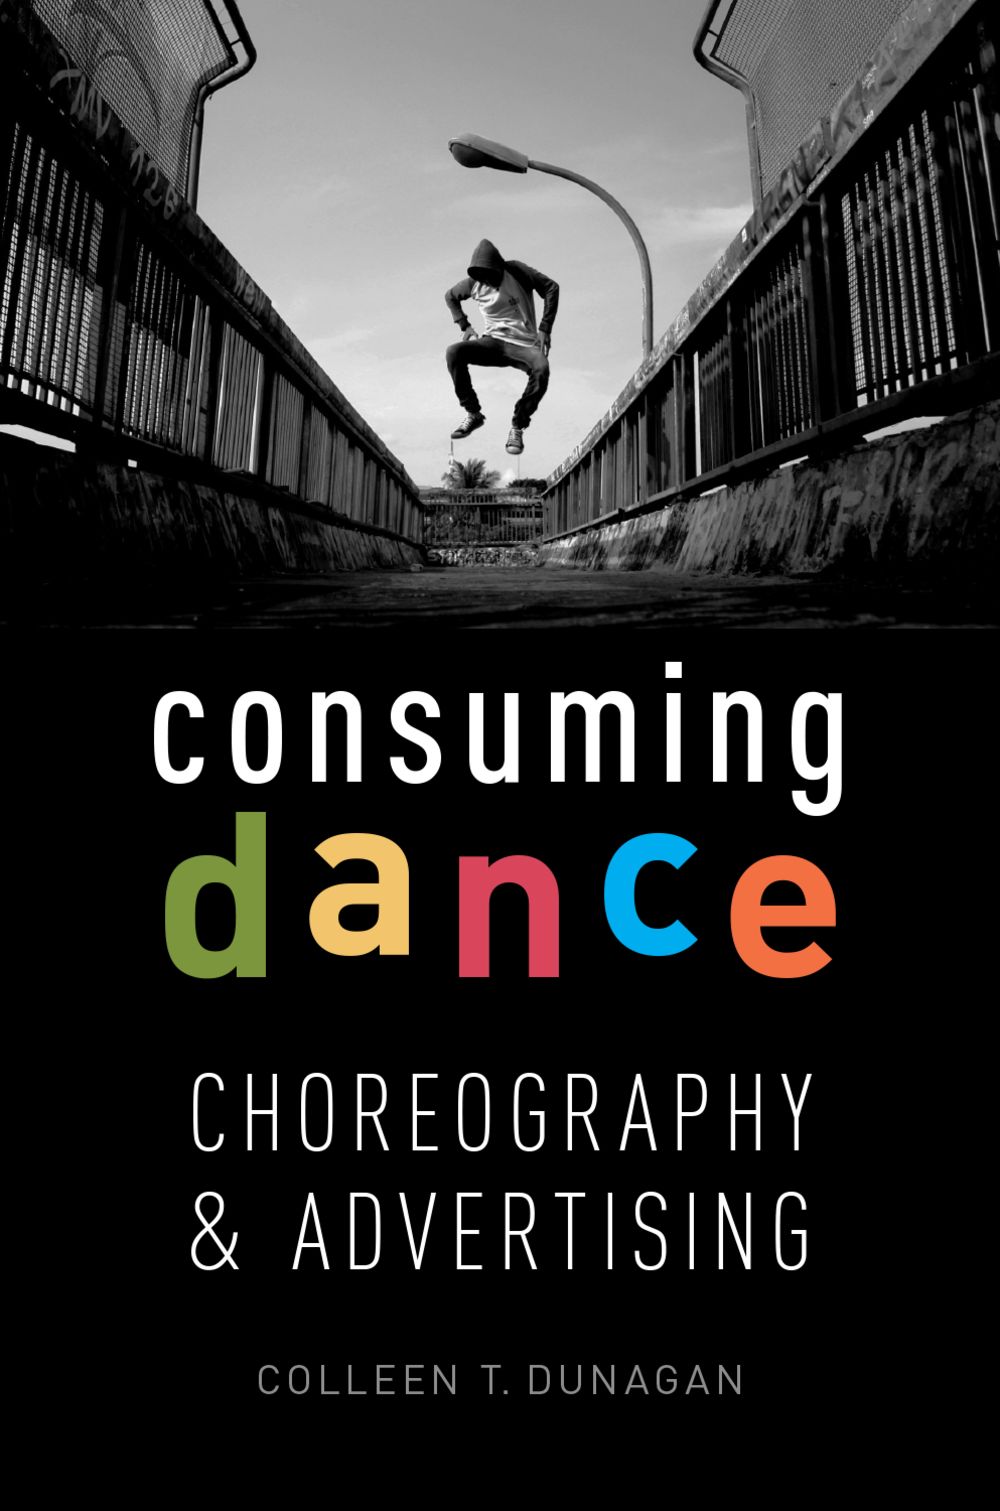 Consuming Dance Choreography and Advertising